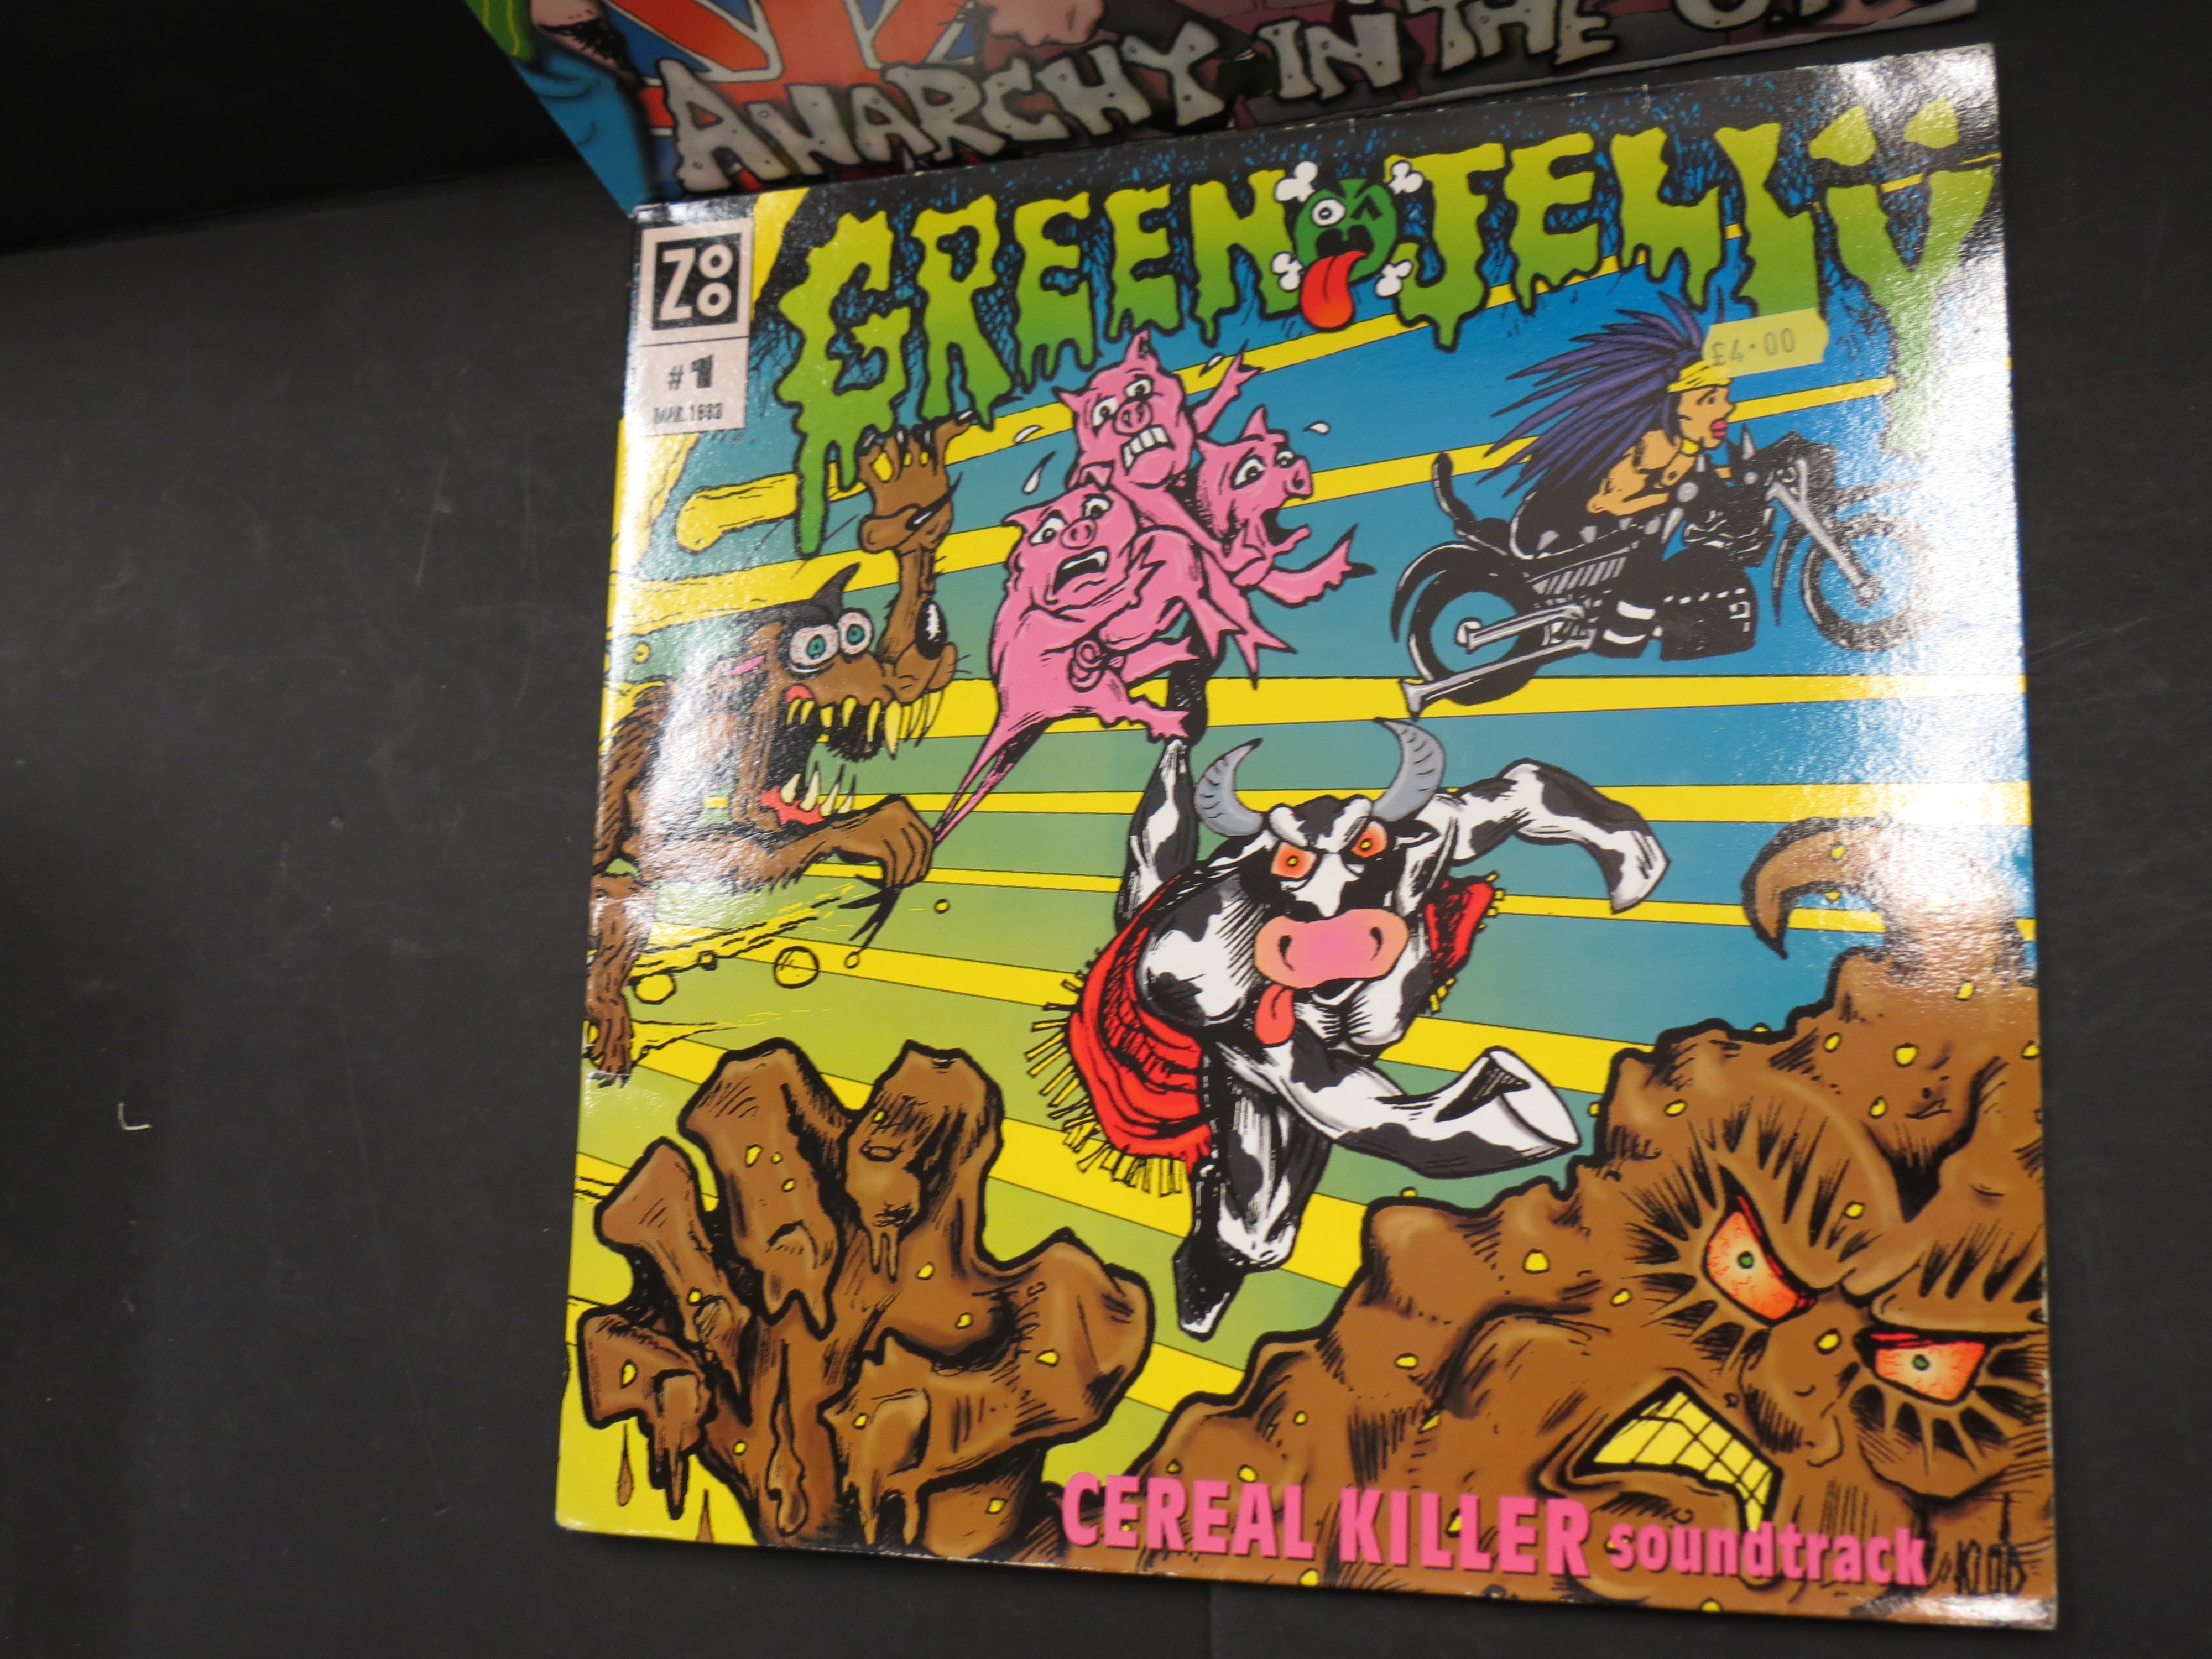 Vinyl - Green Jelly 1 LP and 1 12" single to include Cereal Killer Soundtrack (Zoo 7244511038 1) and - Image 2 of 3